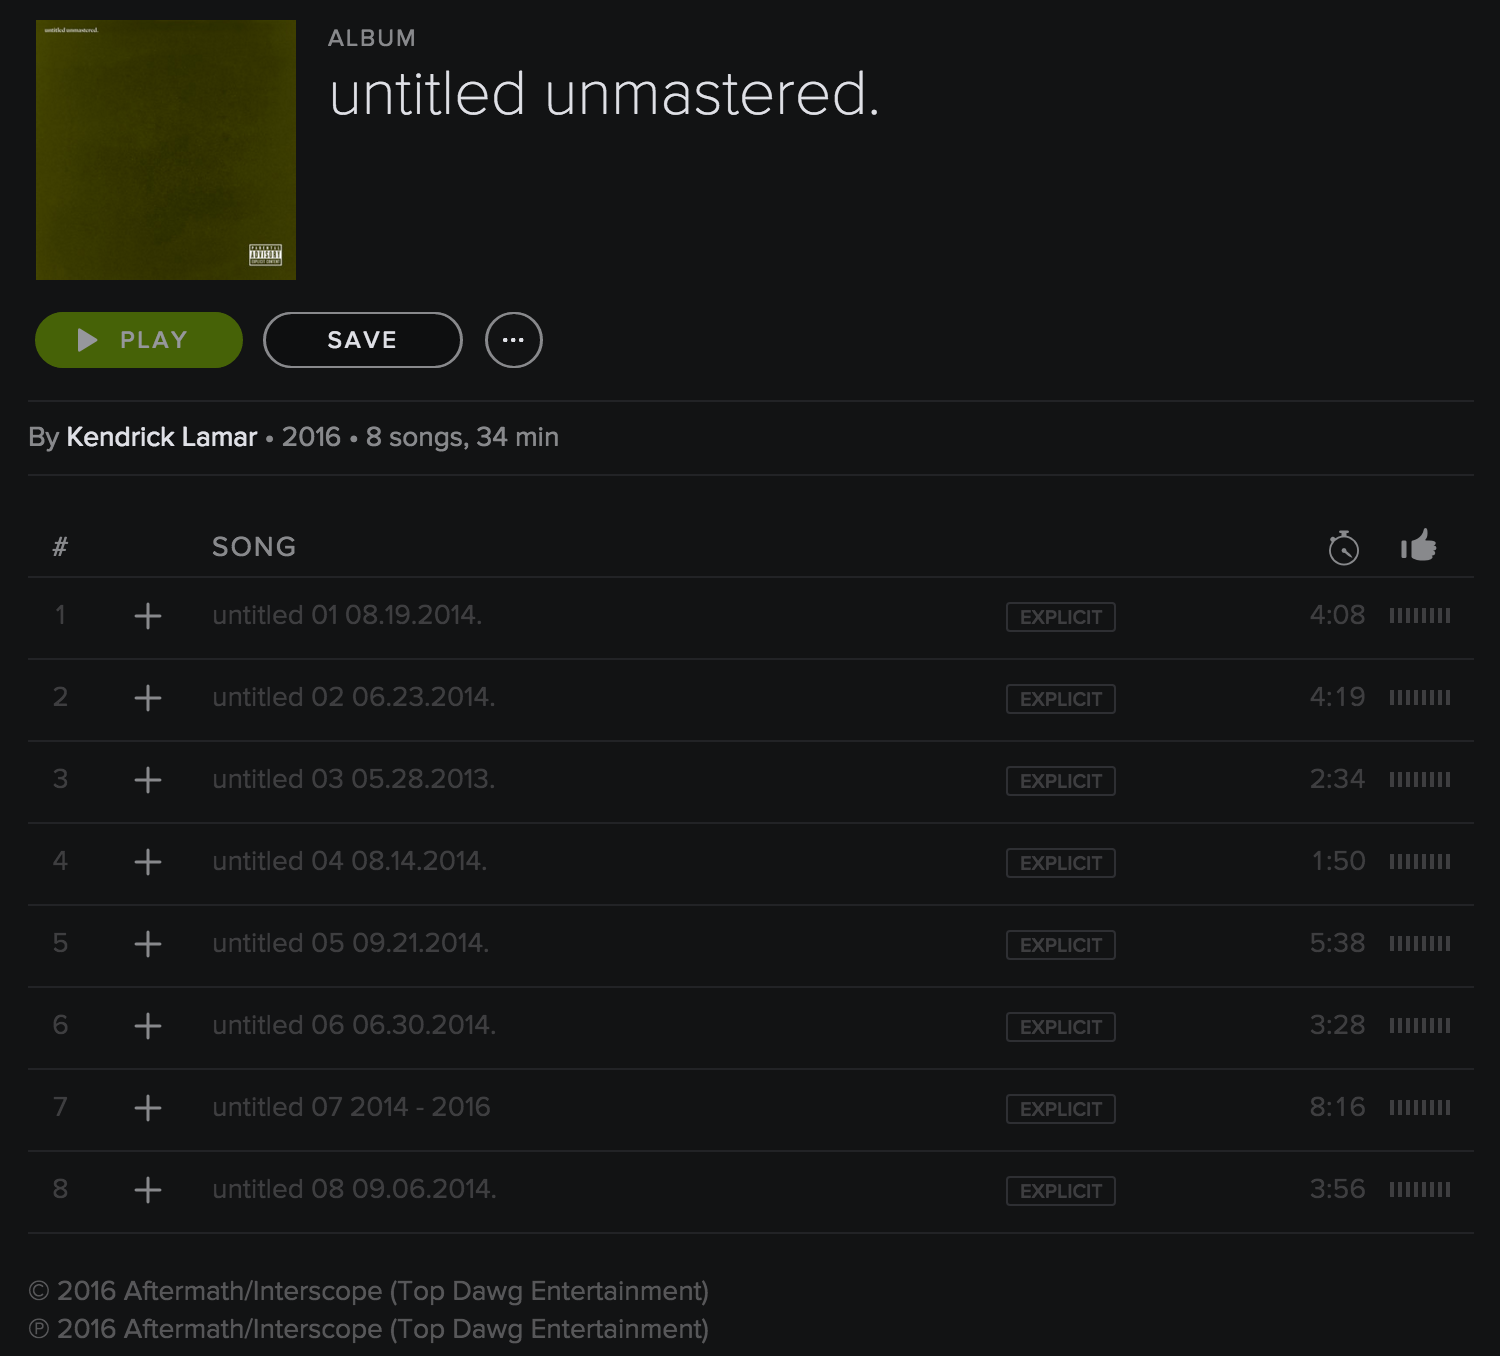 Spotify Releases Info on Surprise New Kendrick Lamar Album 'untitled unmastered.'